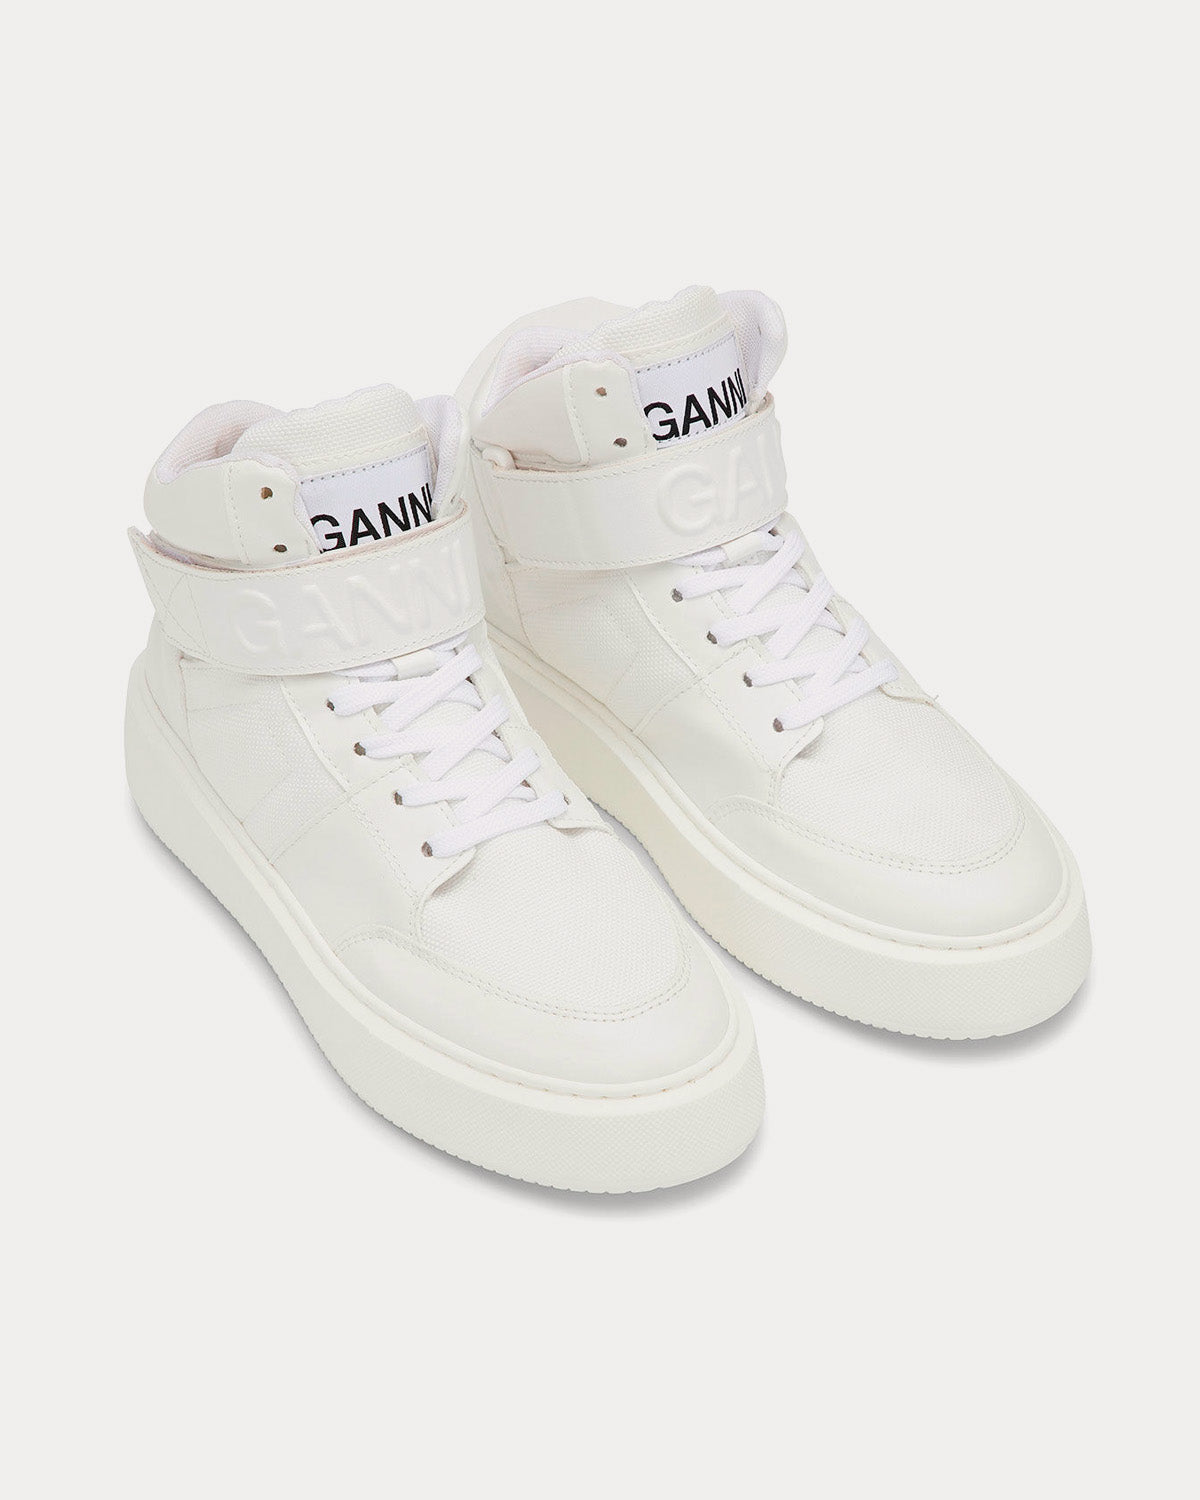 Ganni - Sporty Mix Egret High Top Sneakers